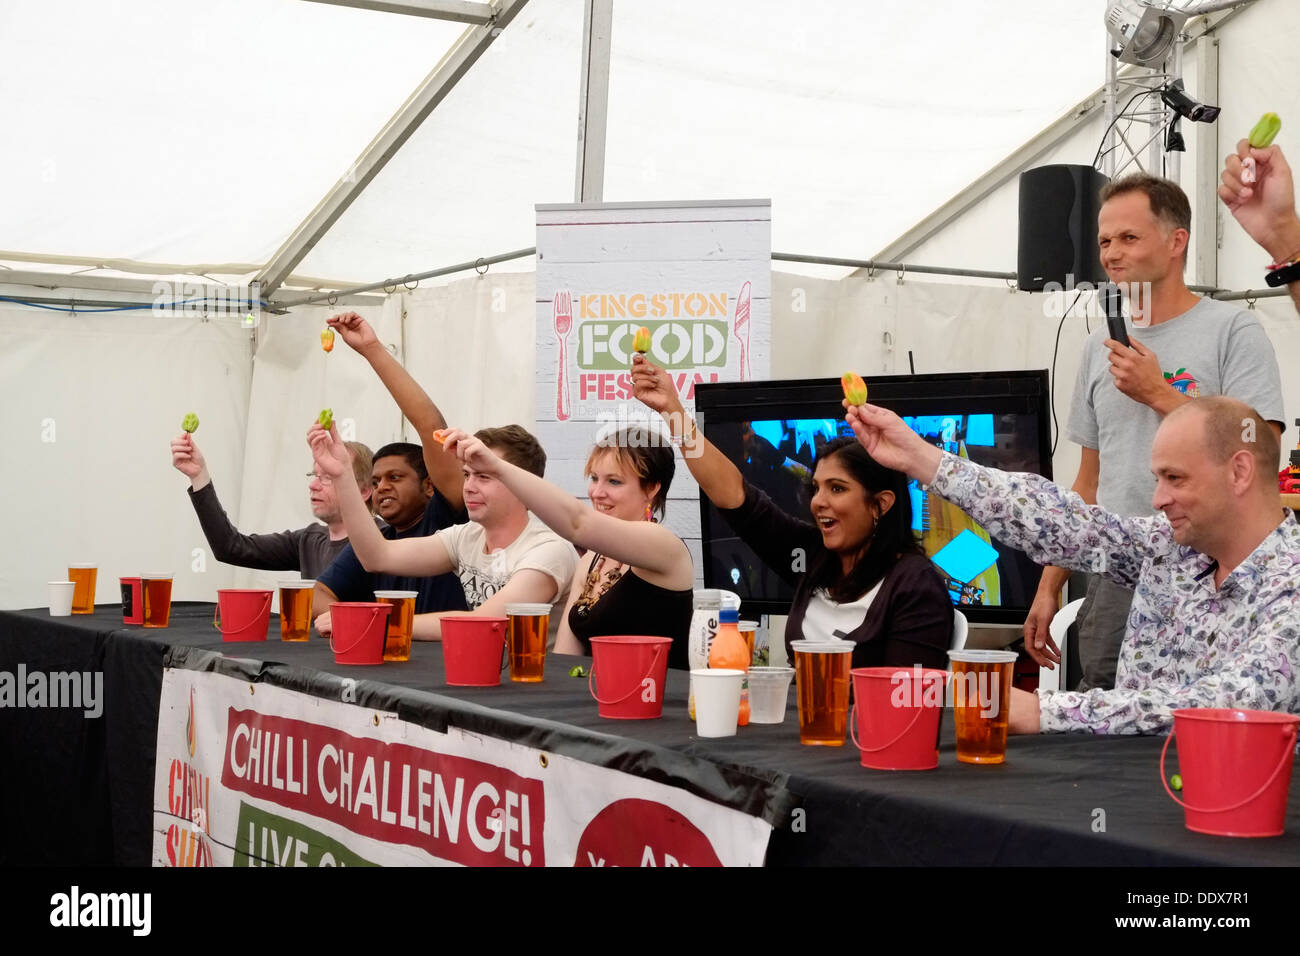 As part of Kingston Food Festival, contestants line up to take part in the Chili Challenge, Contestants start to suffer. Stock Photo